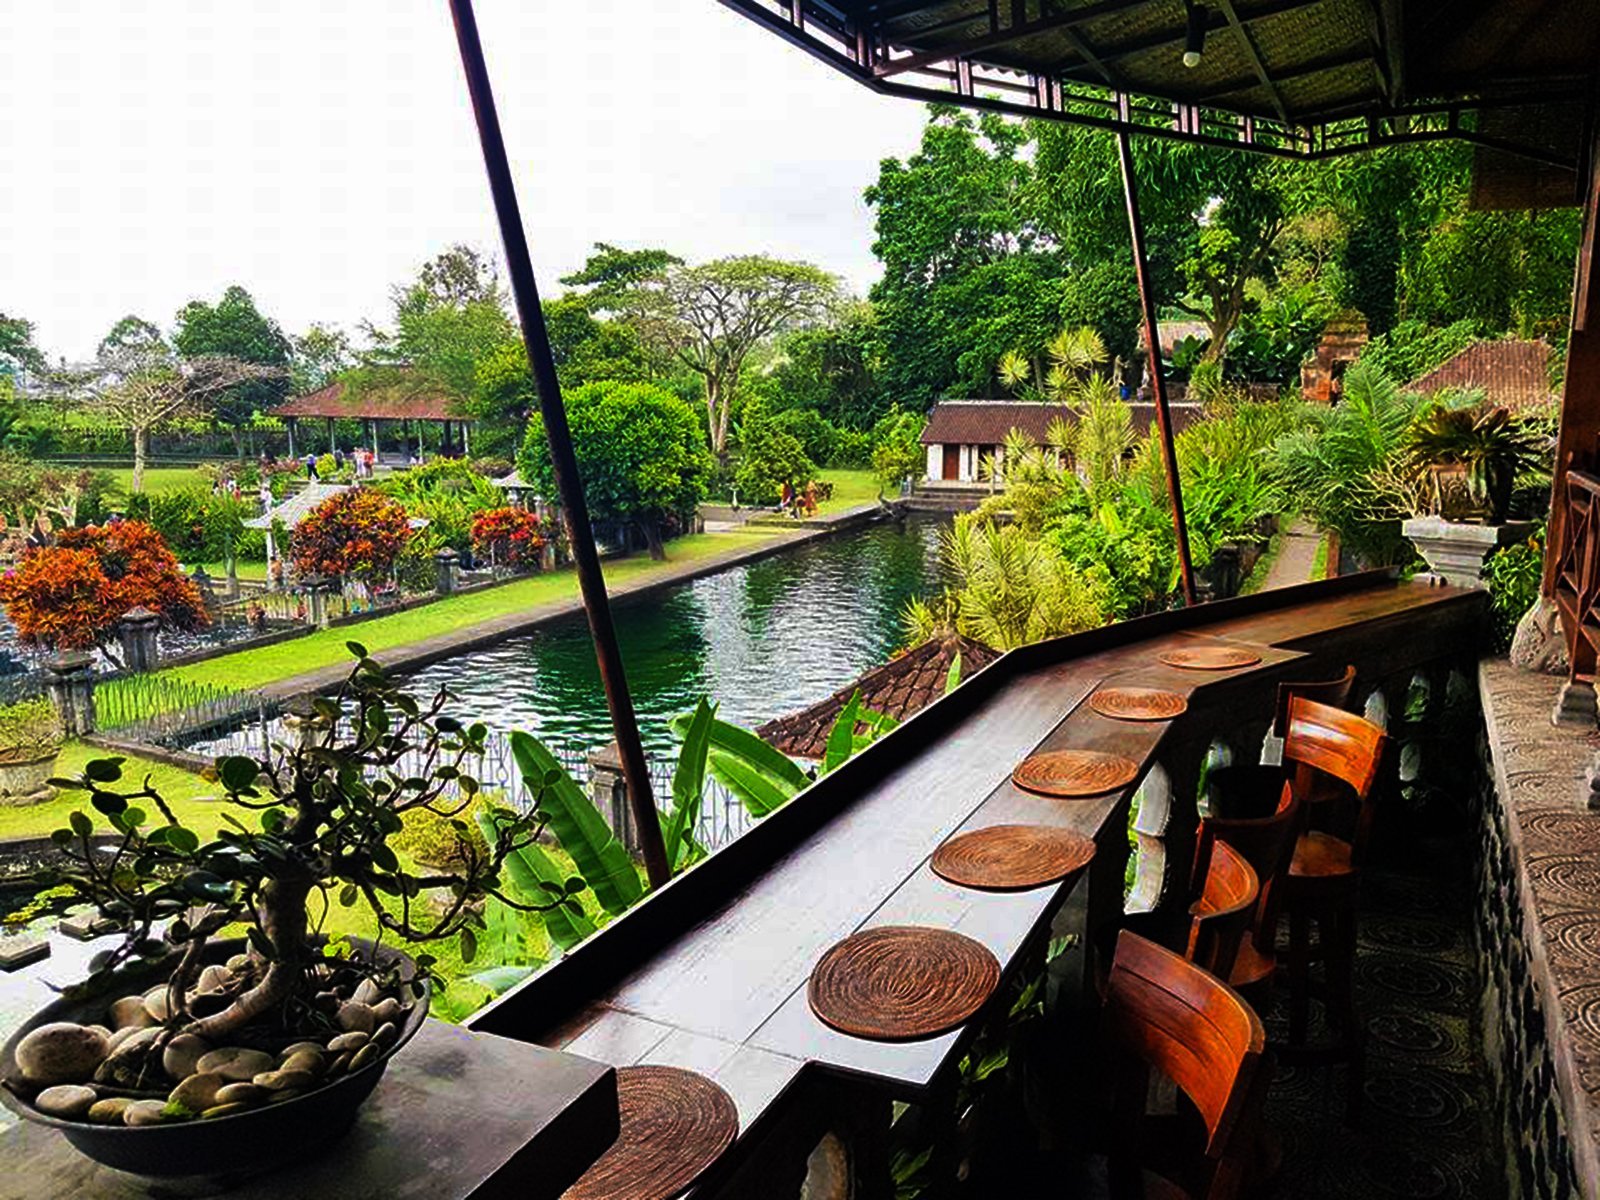 View from the restaurant. Img: Tirta Ayu official